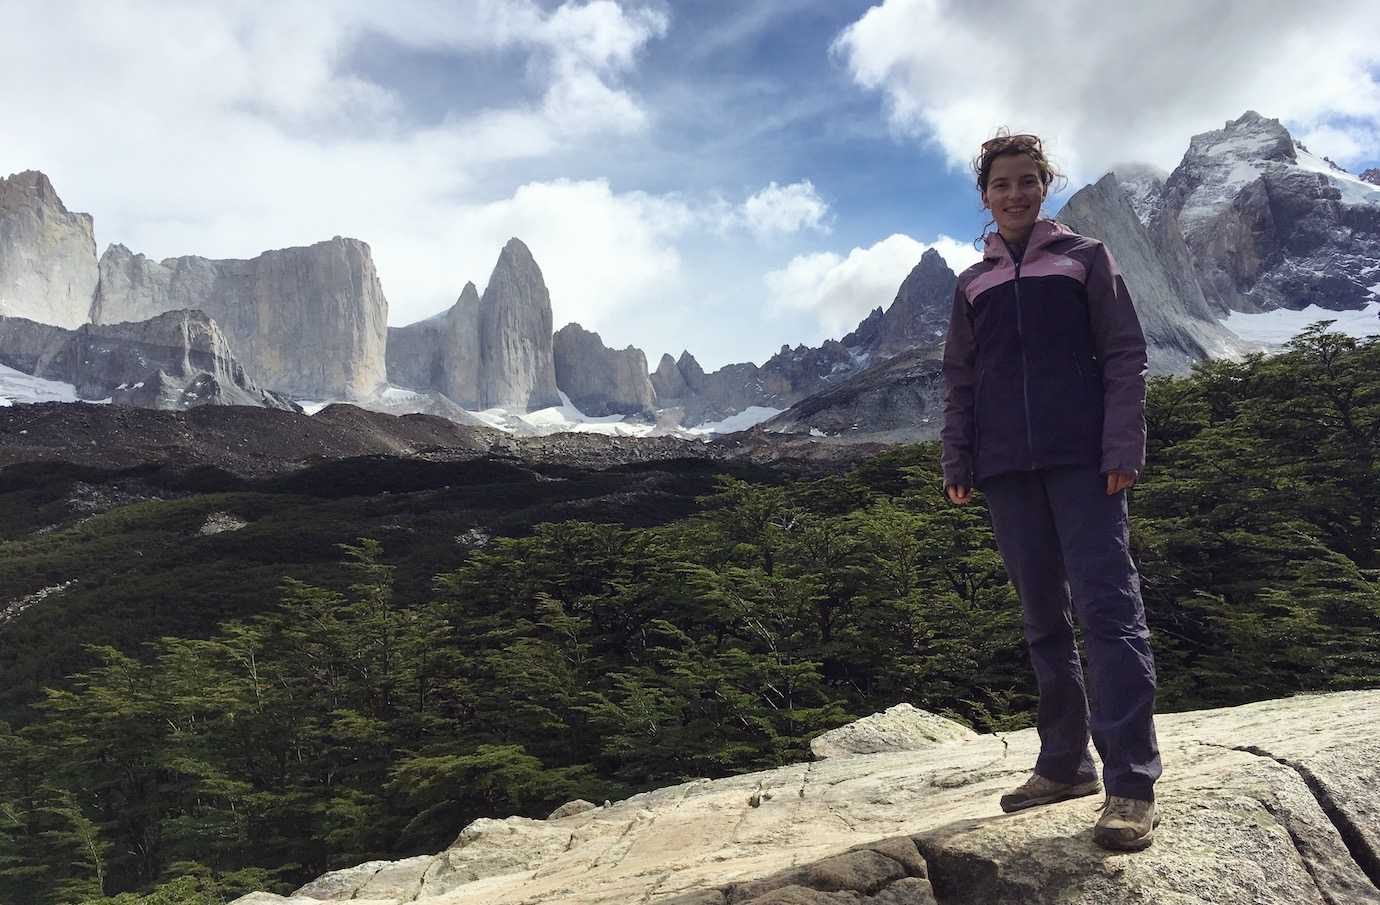 On this Day: Day 3 of W Trek in Torres del Paine